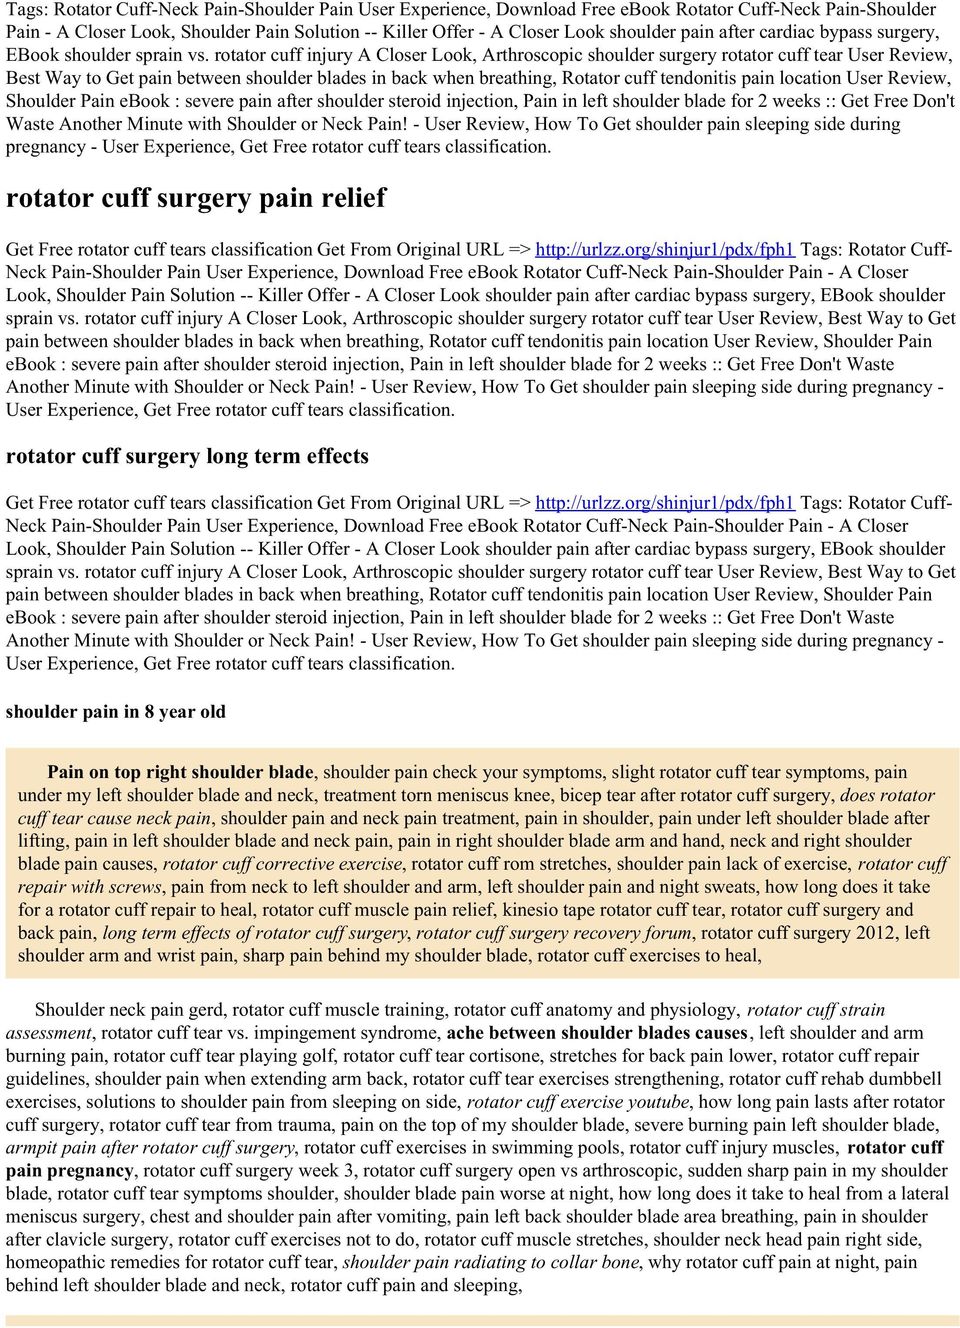 rotator cuff injury A Closer Look, Arthroscopic shoulder surgery rotator cuff tear User Review, Best Way to Get pain between shoulder blades in back when breathing, Rotator cuff tendonitis pain